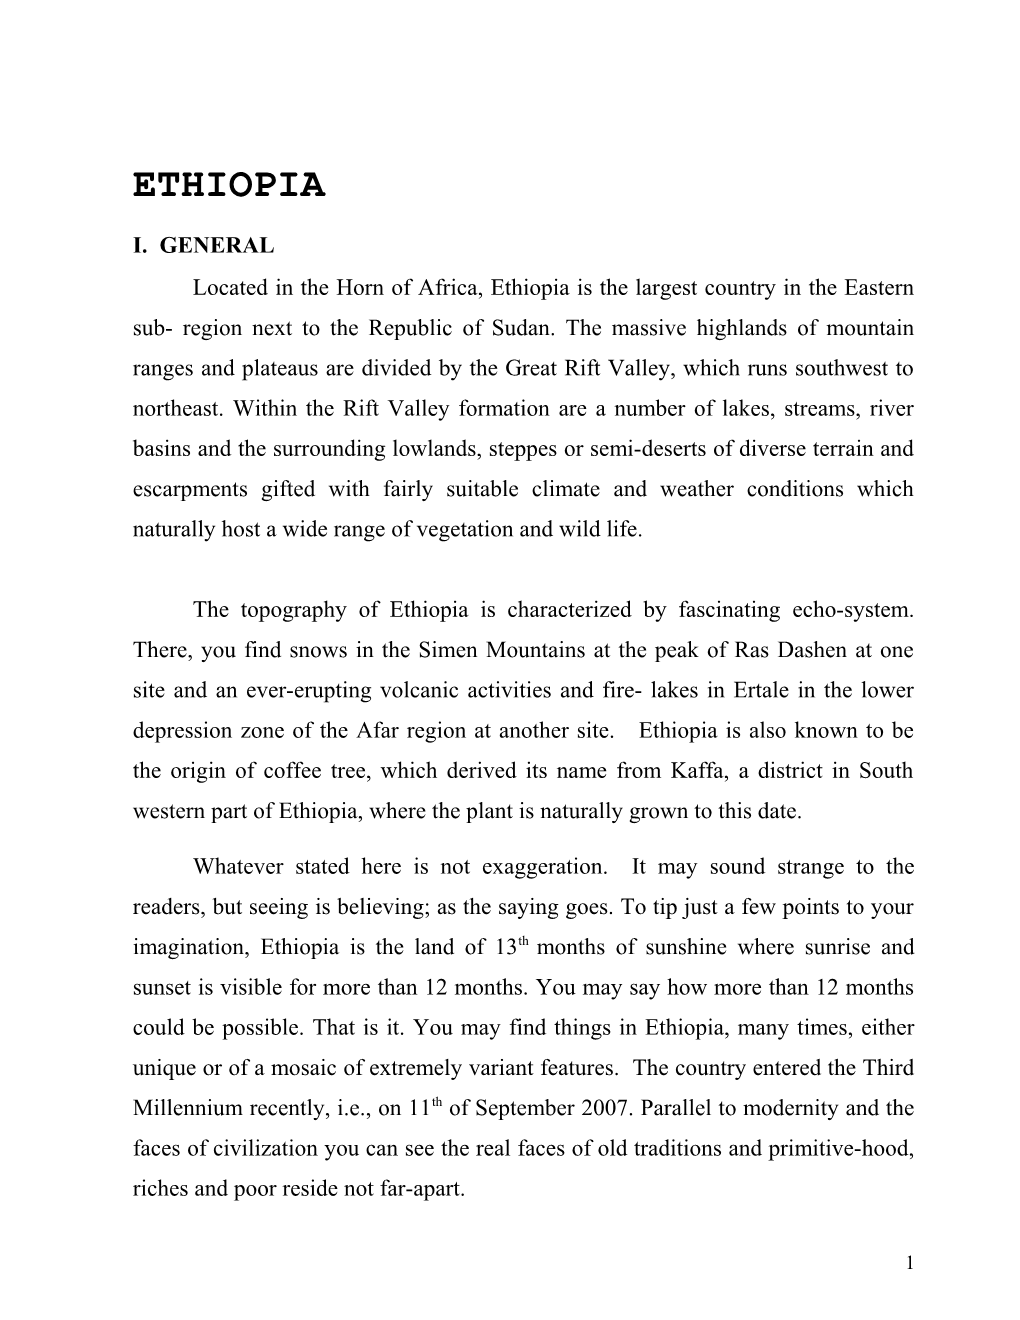 Located in the Horn of Africa, Ethiopia Is the Largest Country in the Eastern Sub- Region